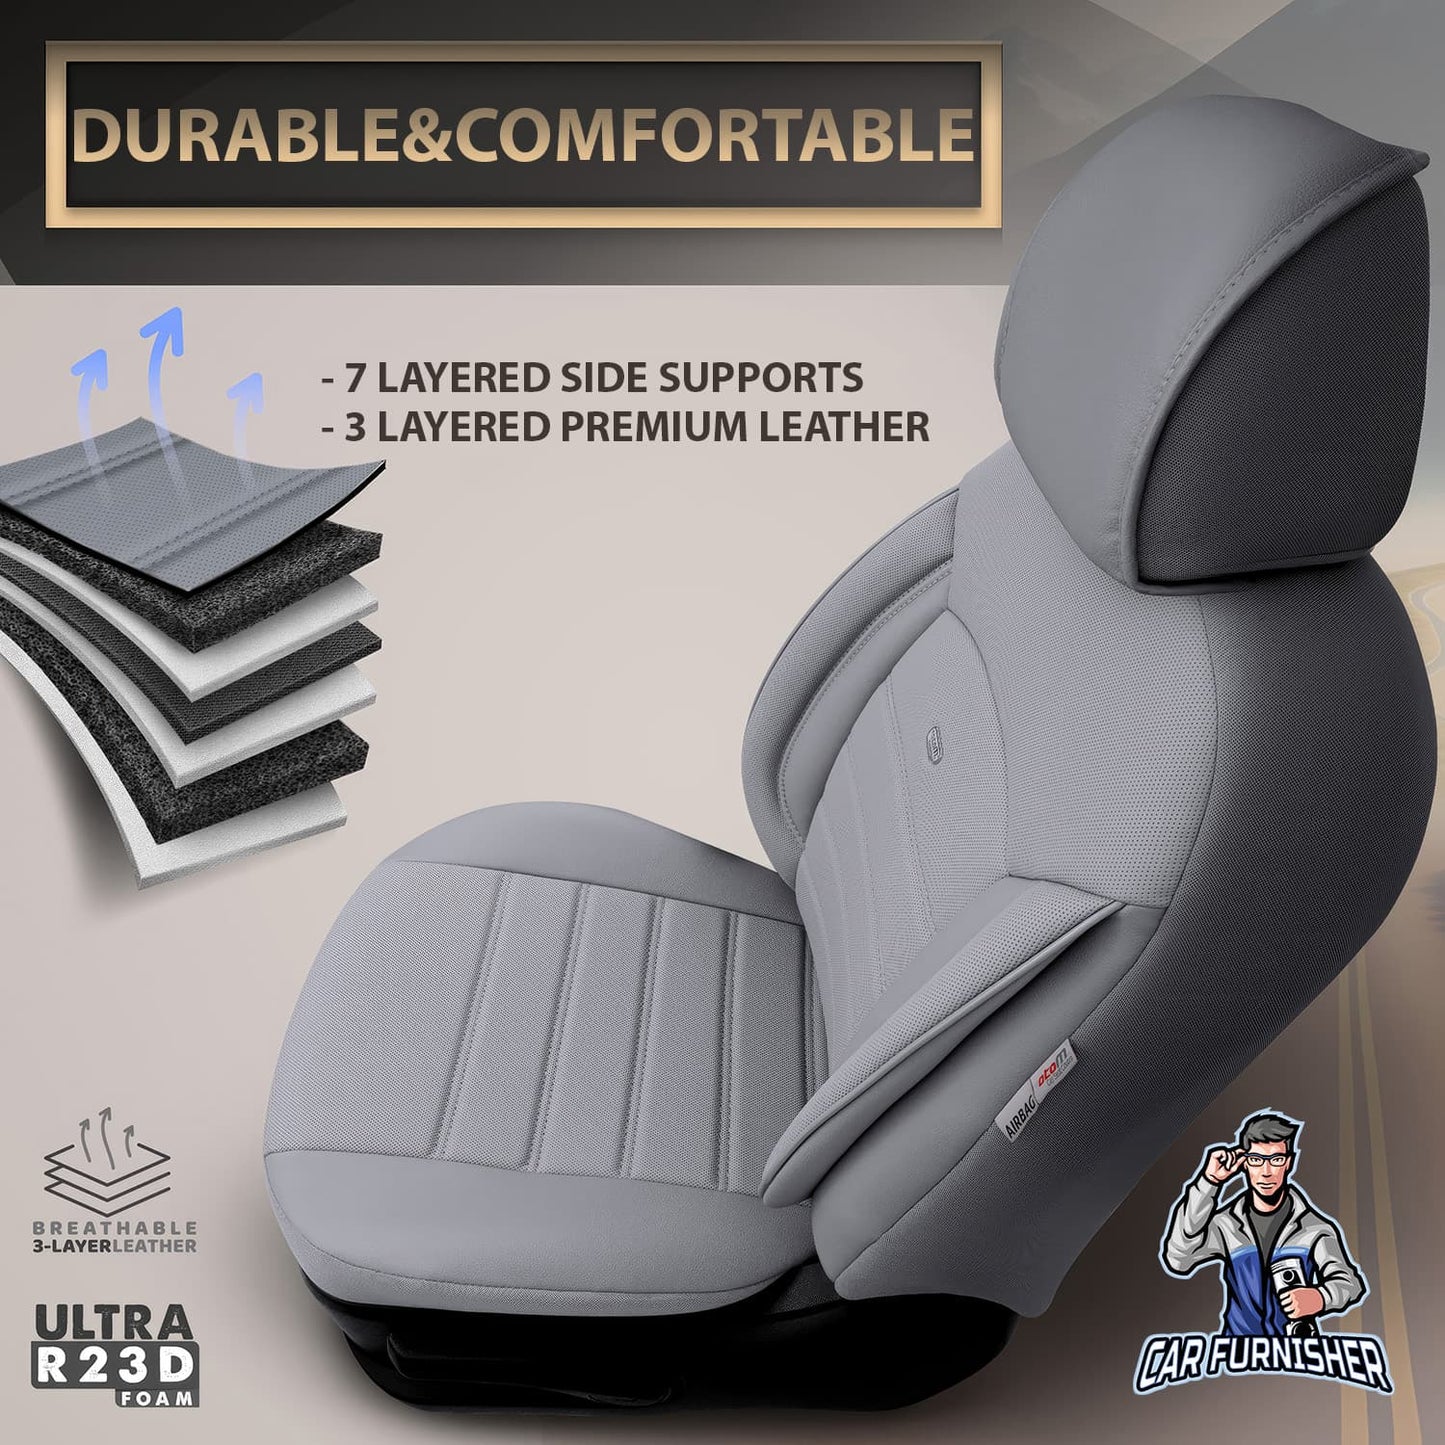 Mercedes 190 Seat Covers Inspire Design Gray 5 Seats + Headrests (Full Set) Full Leather